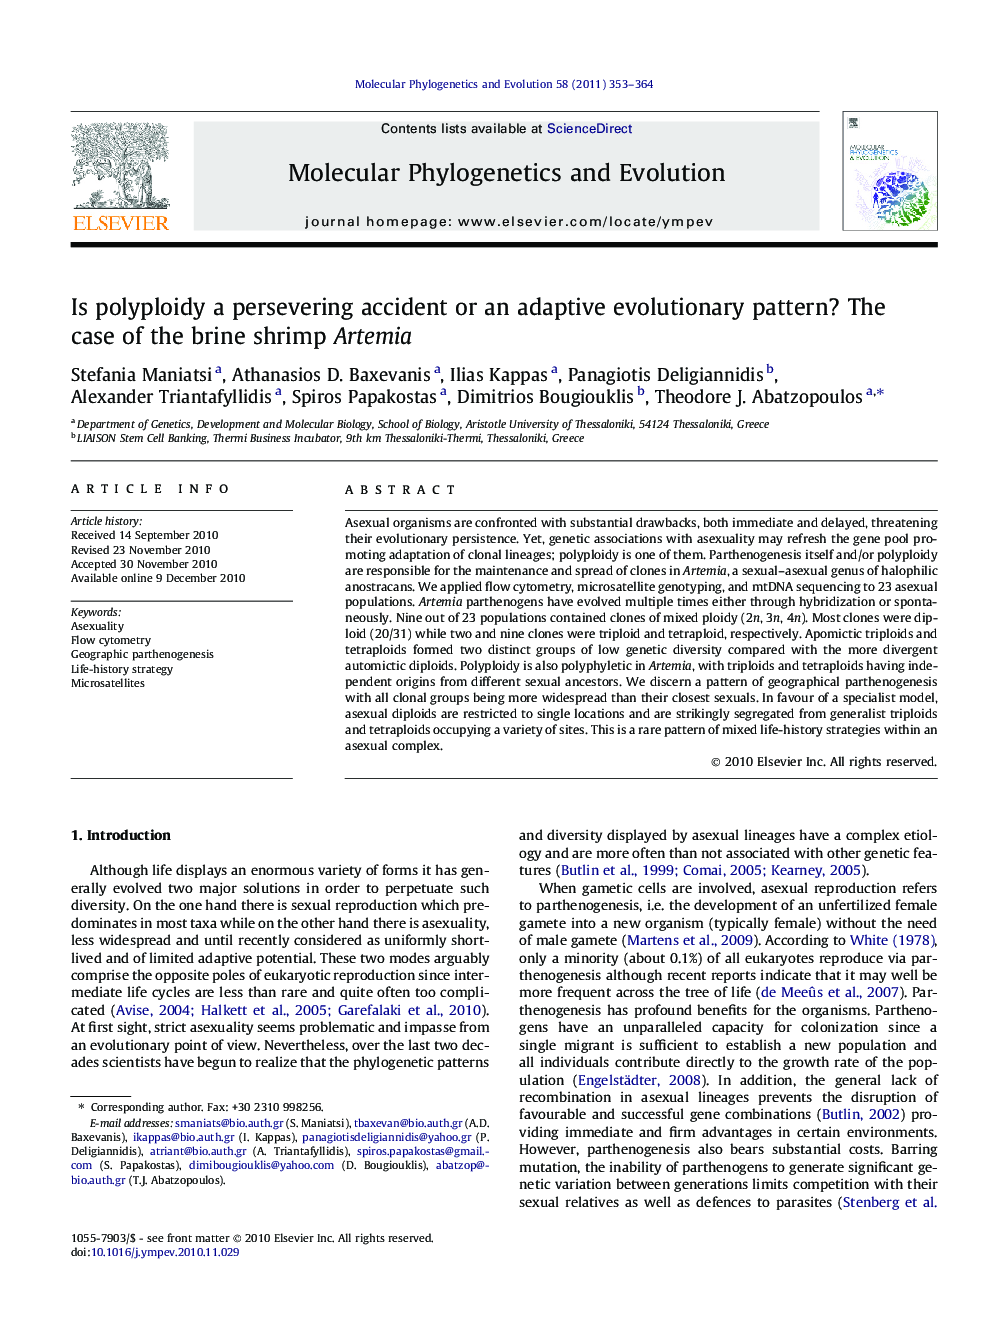 Is polyploidy a persevering accident or an adaptive evolutionary pattern? The case of the brine shrimp Artemia